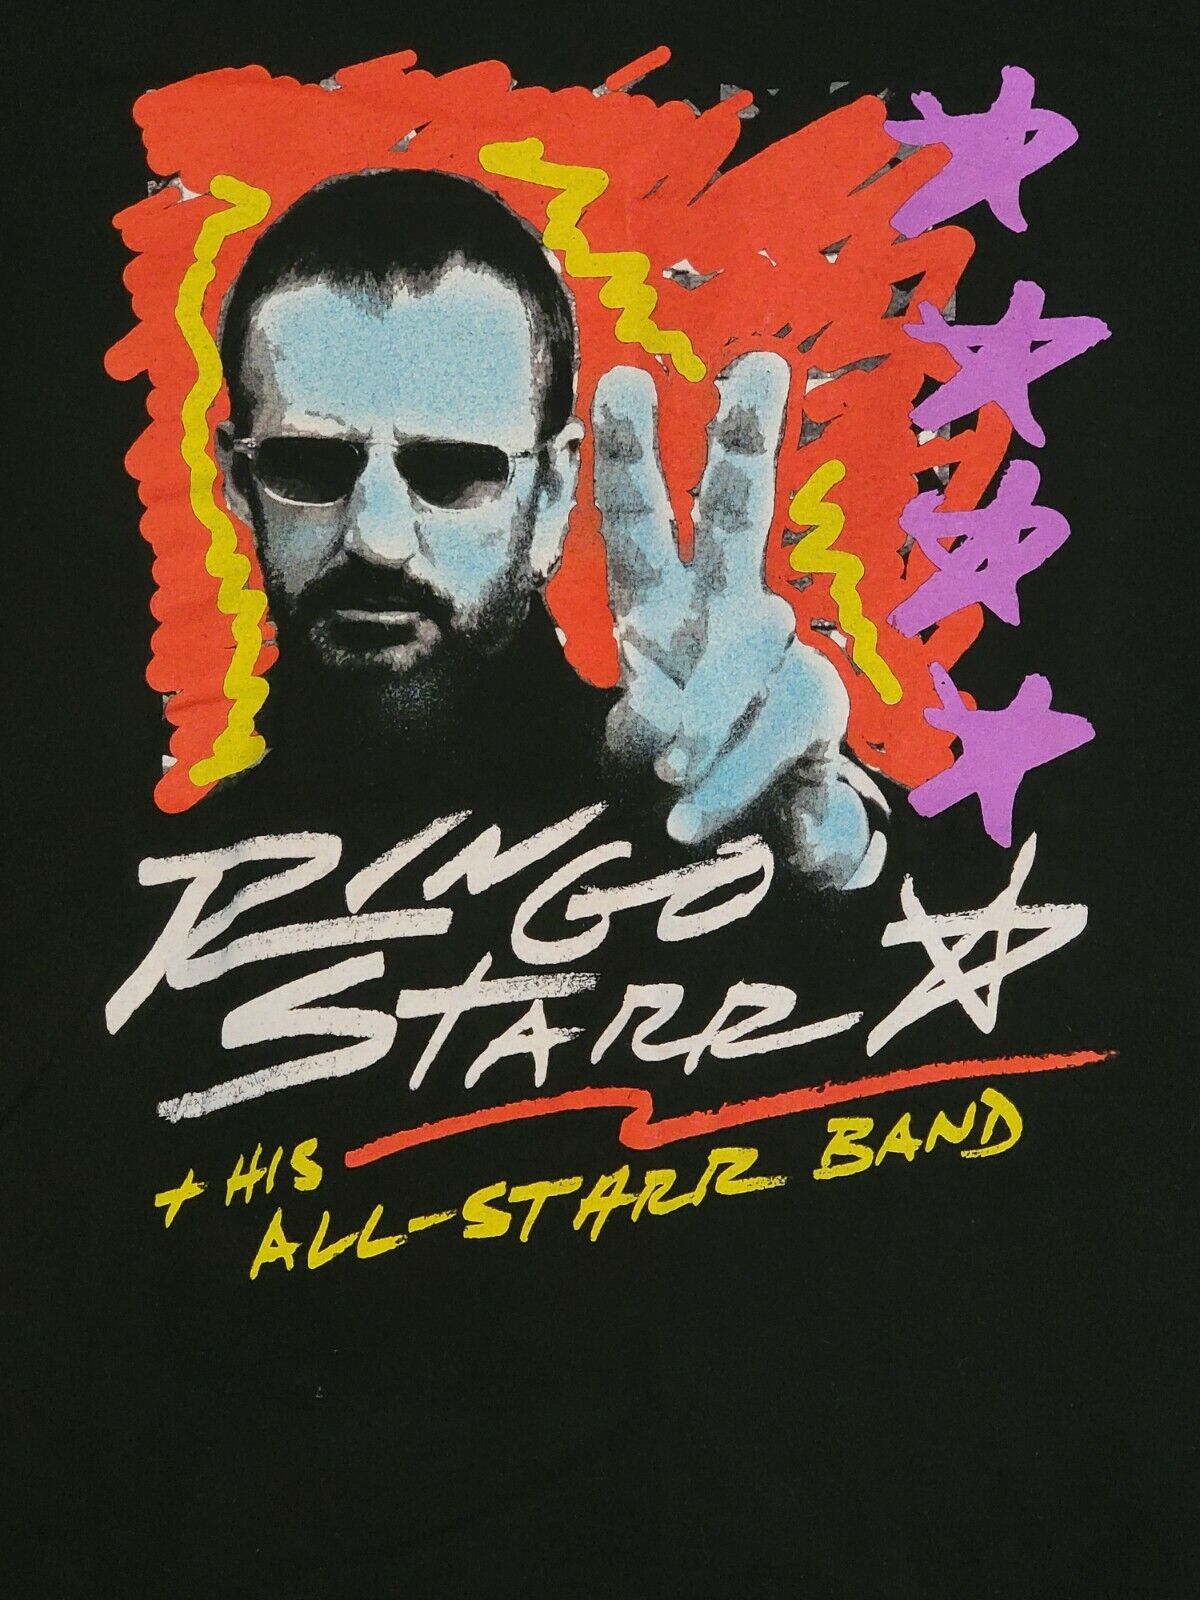 Genuine Vintage Ringo Starr And His All Starr Band 2003 Shirt Men's Size 2xl